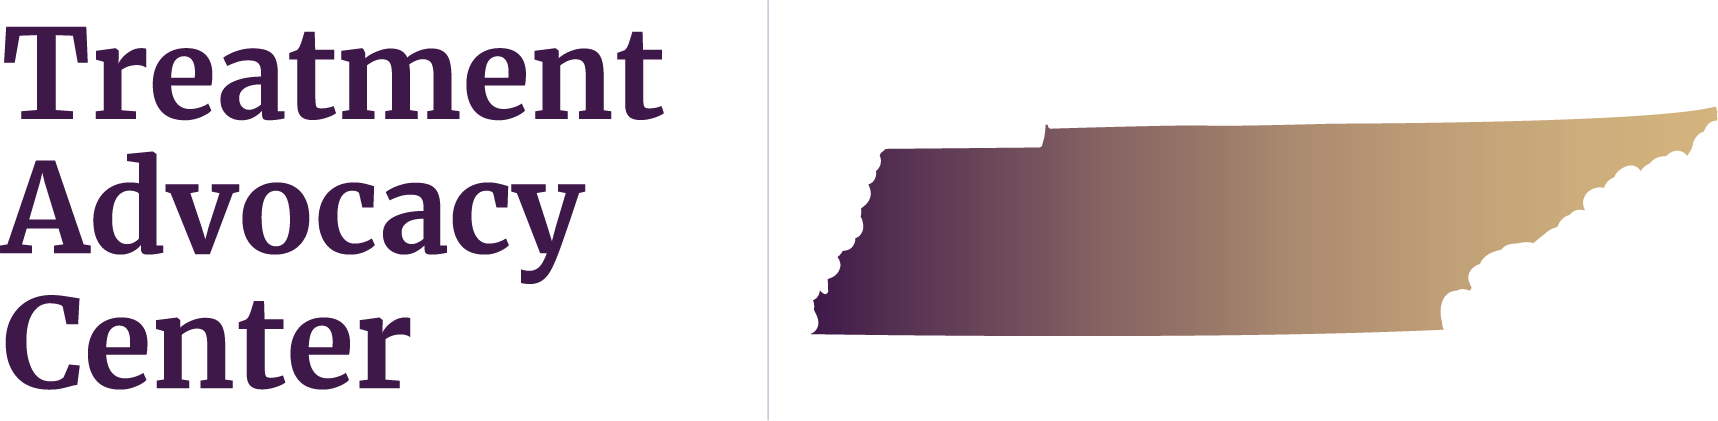 State of Tennessee next to Treatment Advocacy Center text, symbolizing local severe mental illness data, laws, and resources